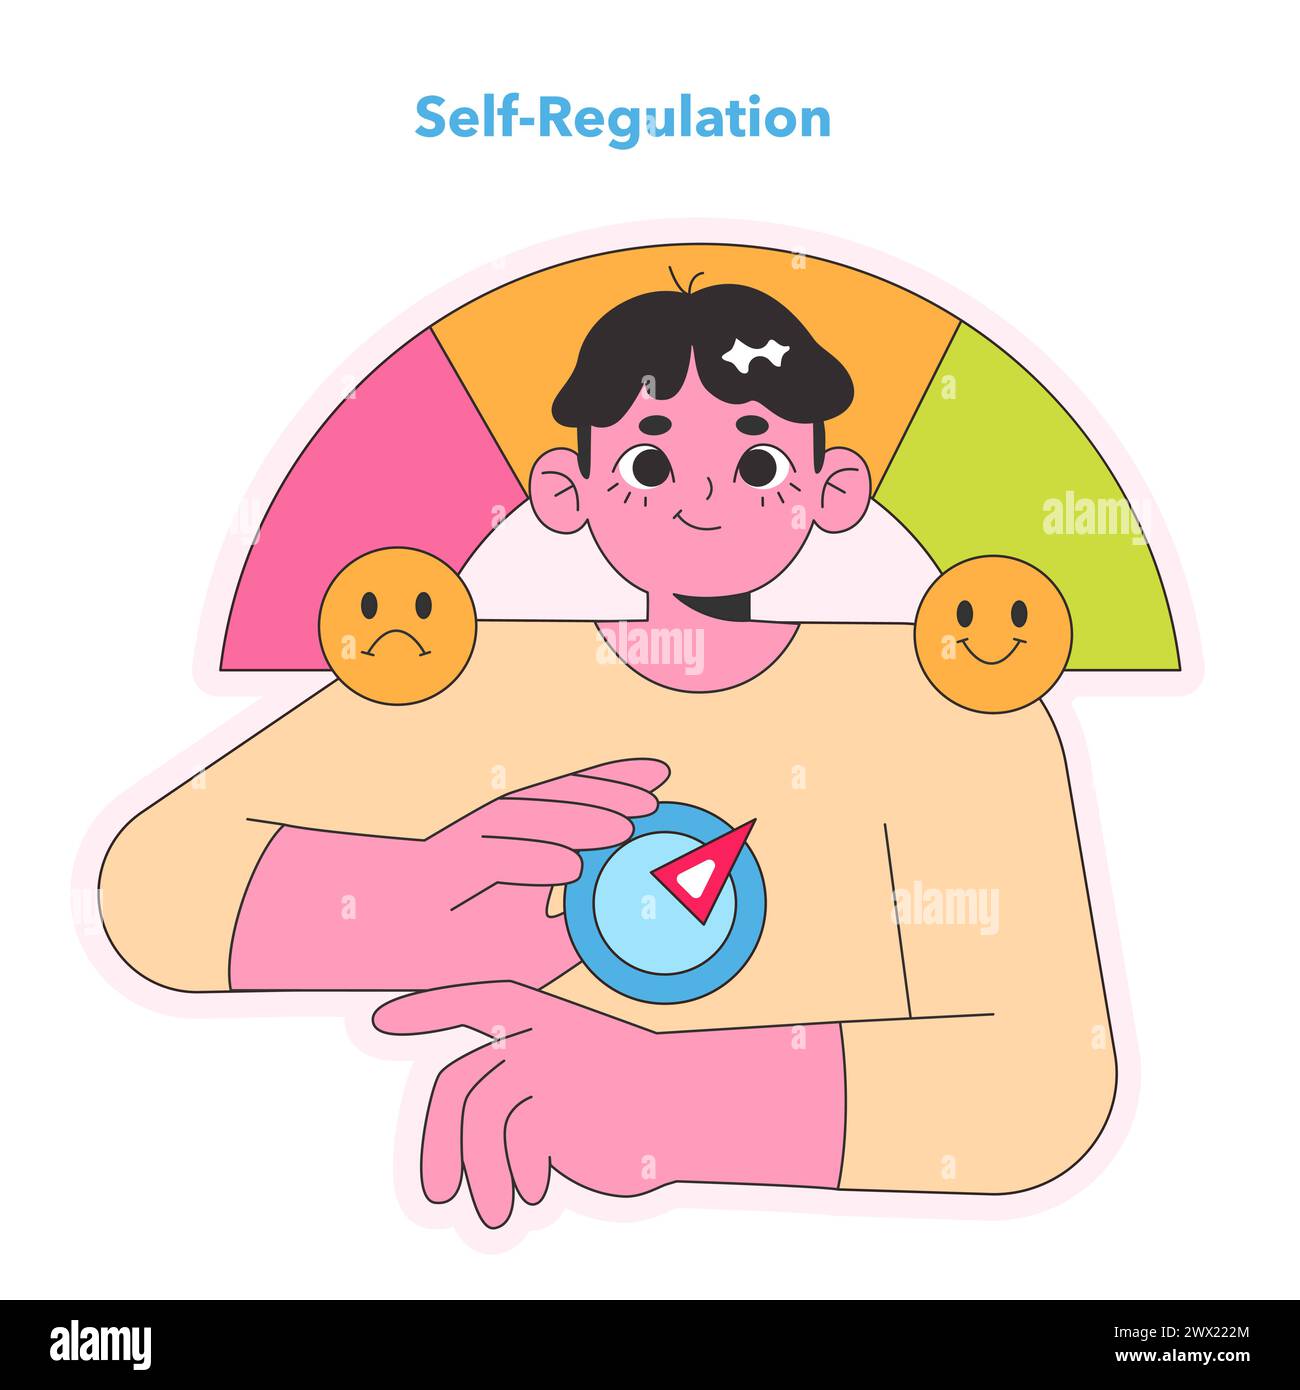 Self-Regulation concept. Person with emotional spectrum and compass, mastering self-control and emotional management. Balance in temperament. Vector illustration. Stock Vector